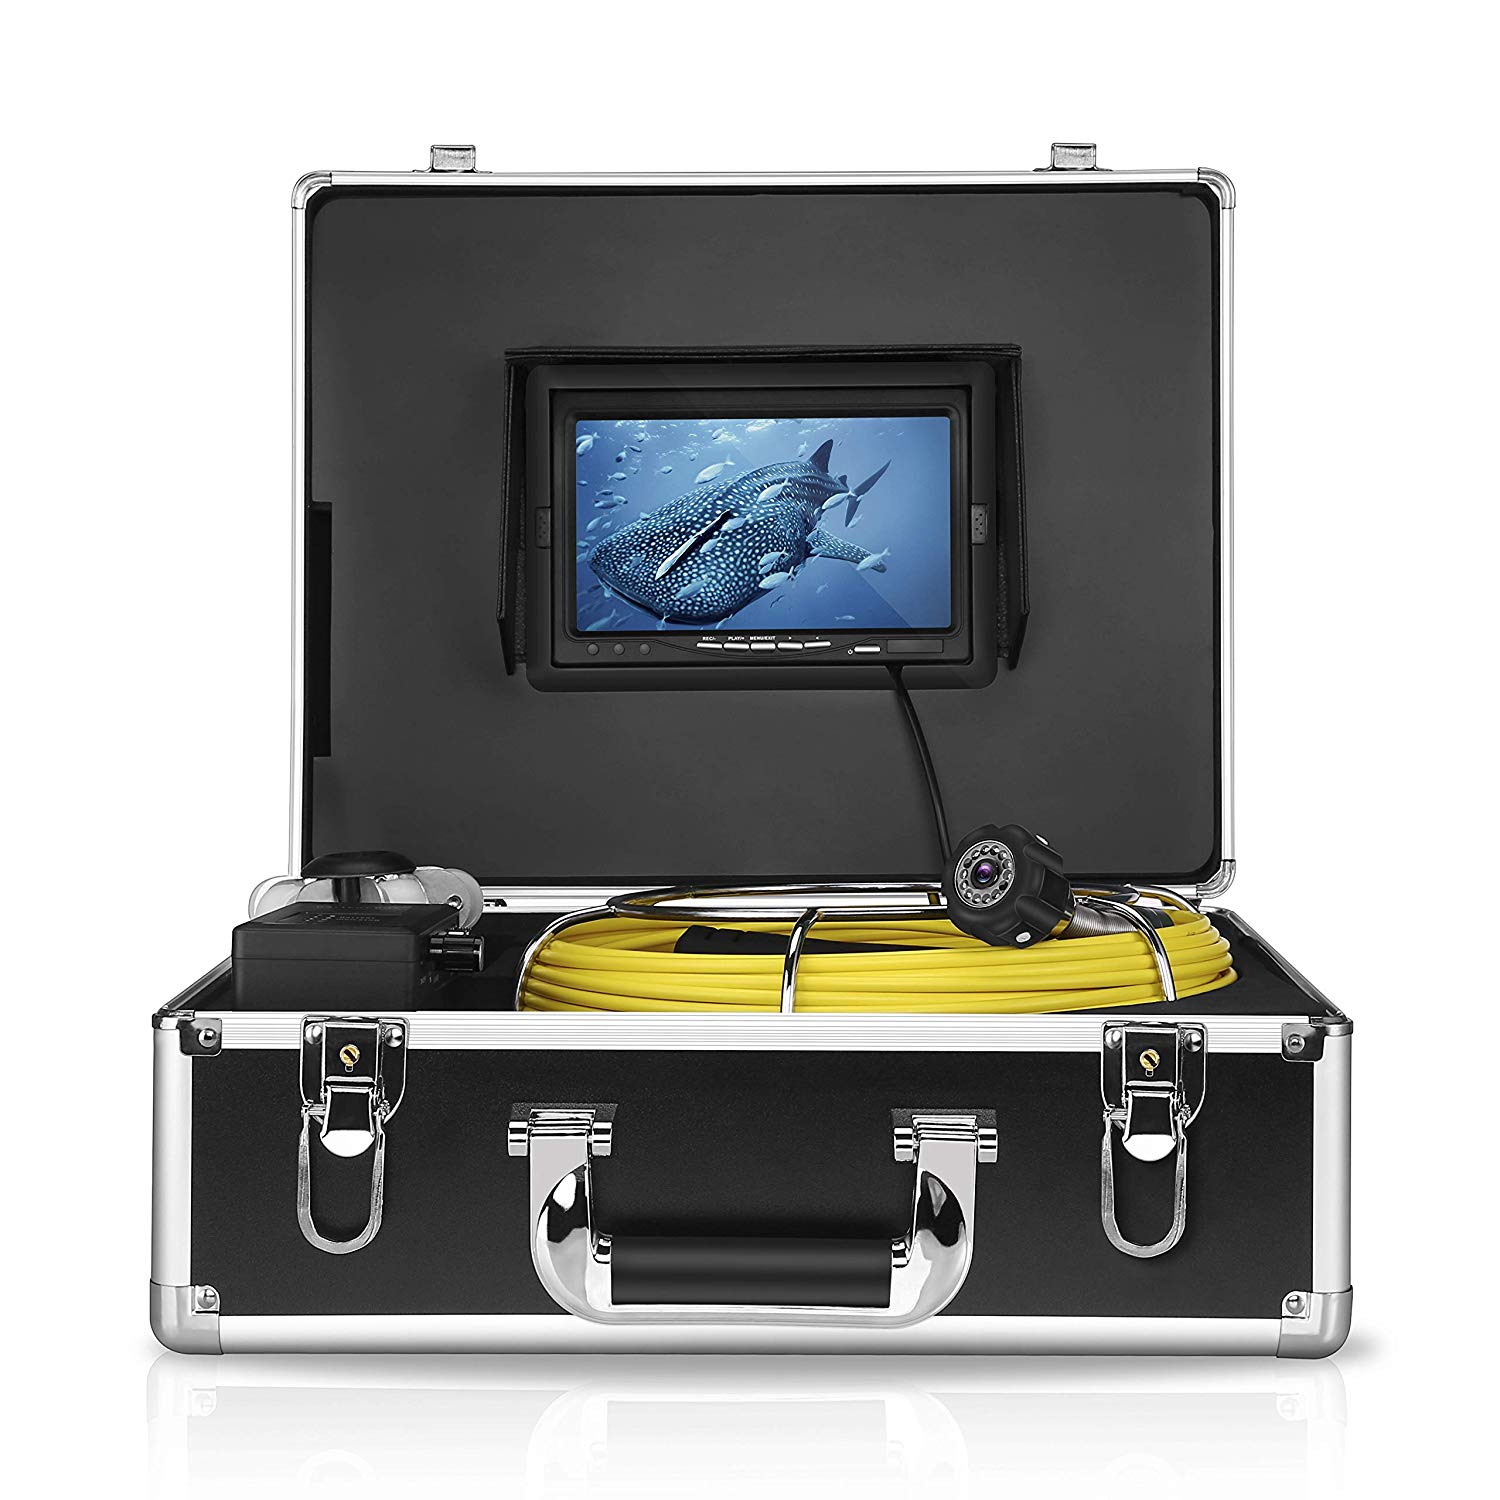 Eyoyo Pipe Pipeline Inspection Camera 20M/65ft Drain Sewer Industrial Endoscope Video Plumbing System with 7 Inch LCD Monitor 1000TVL DVR Recorder Snake Cam (Include 8GB SD Card)